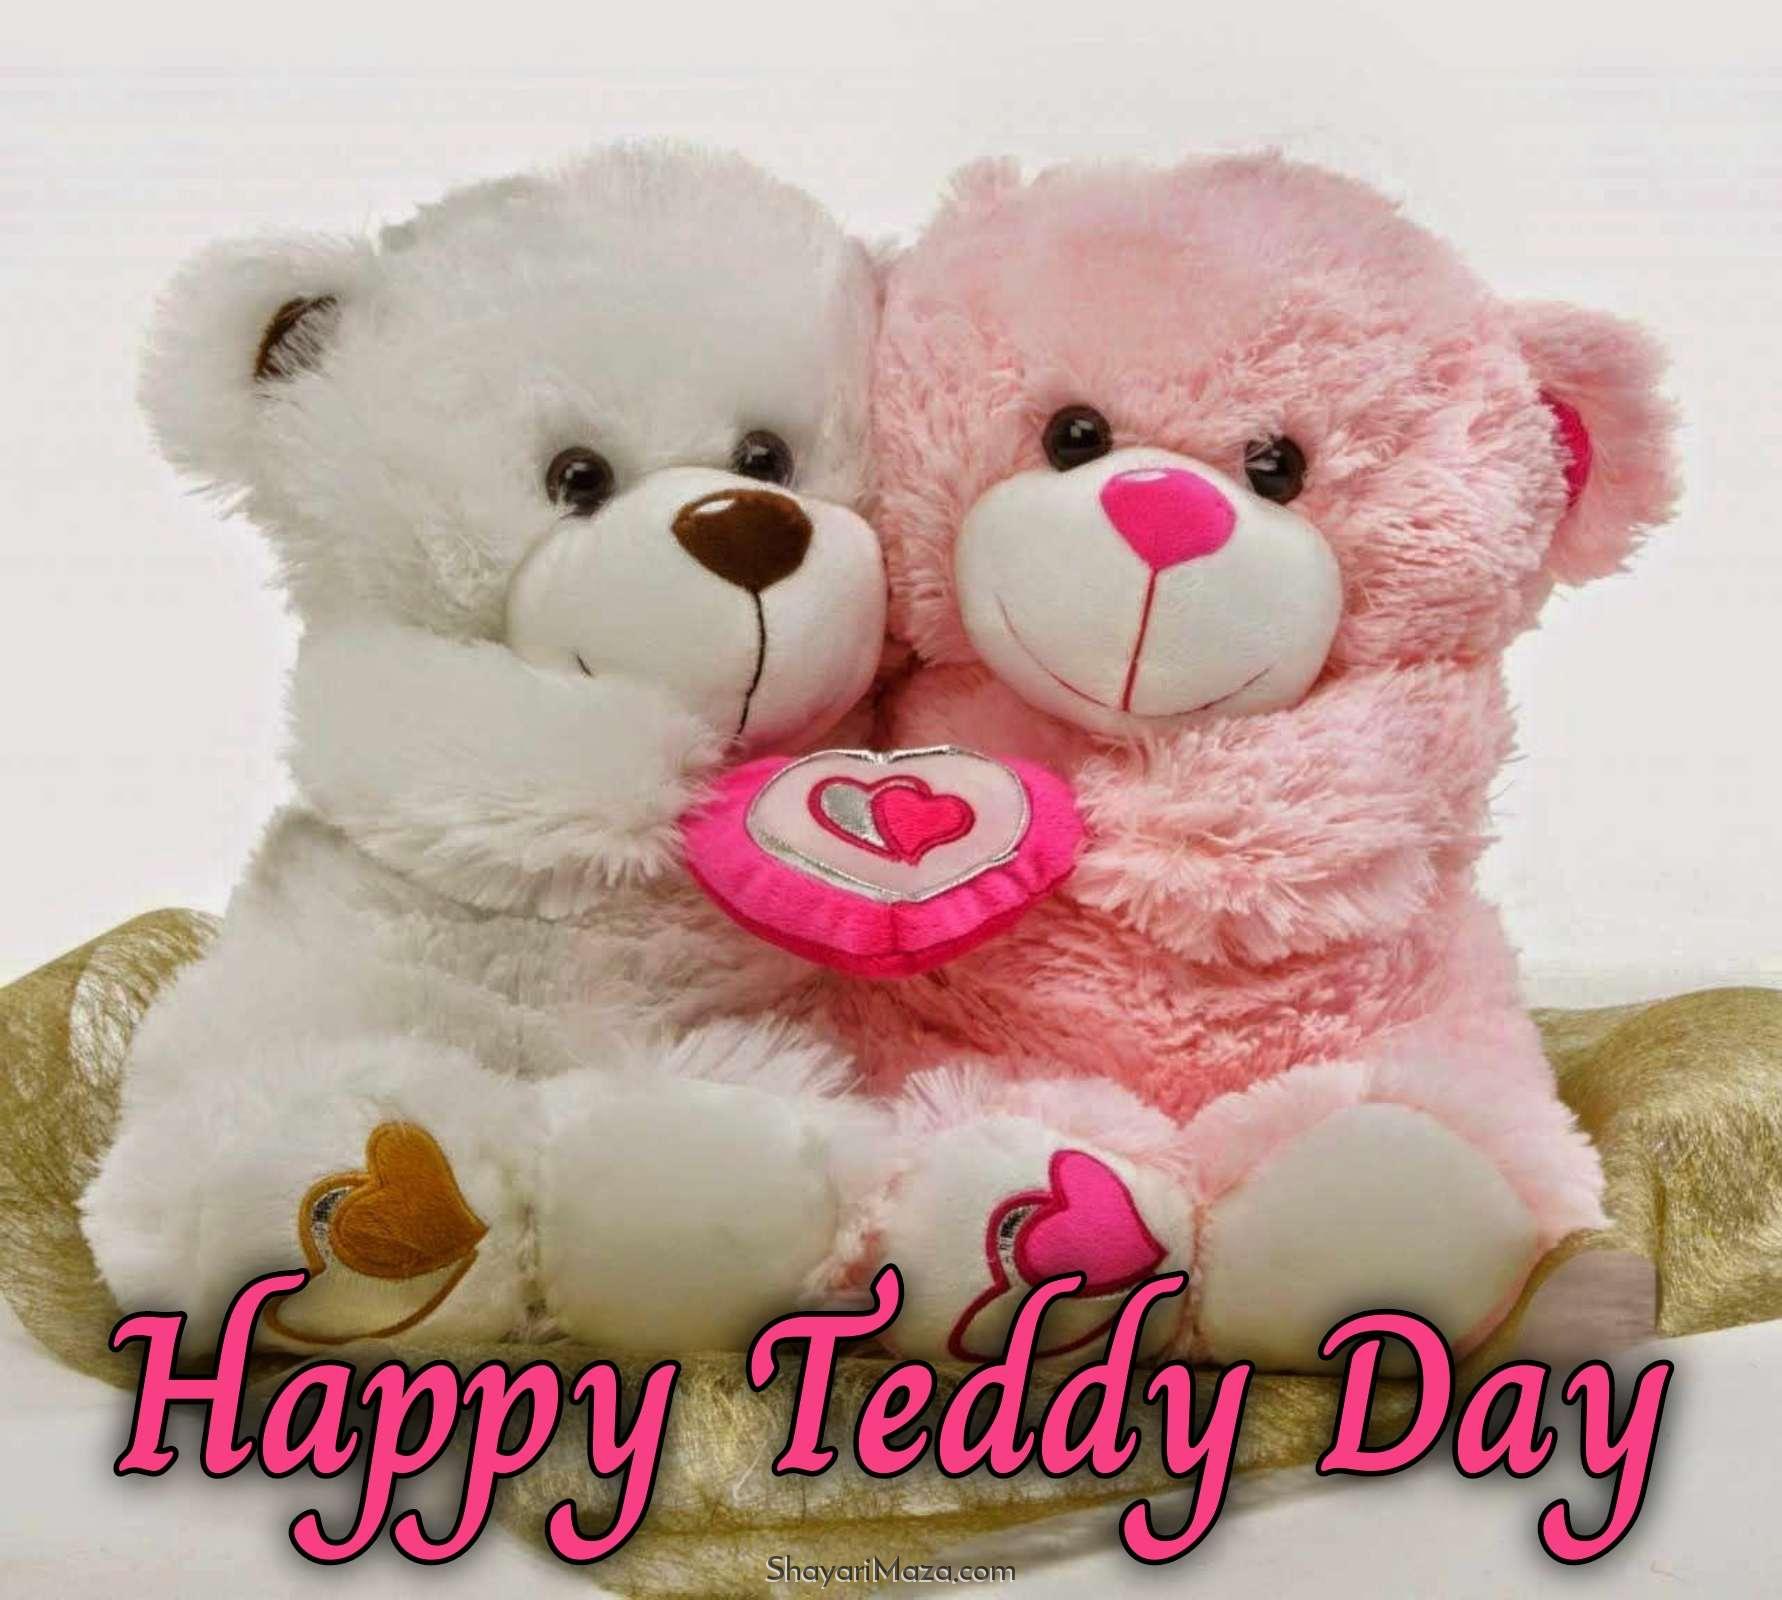 Happy Teddy Bear Day Images Download